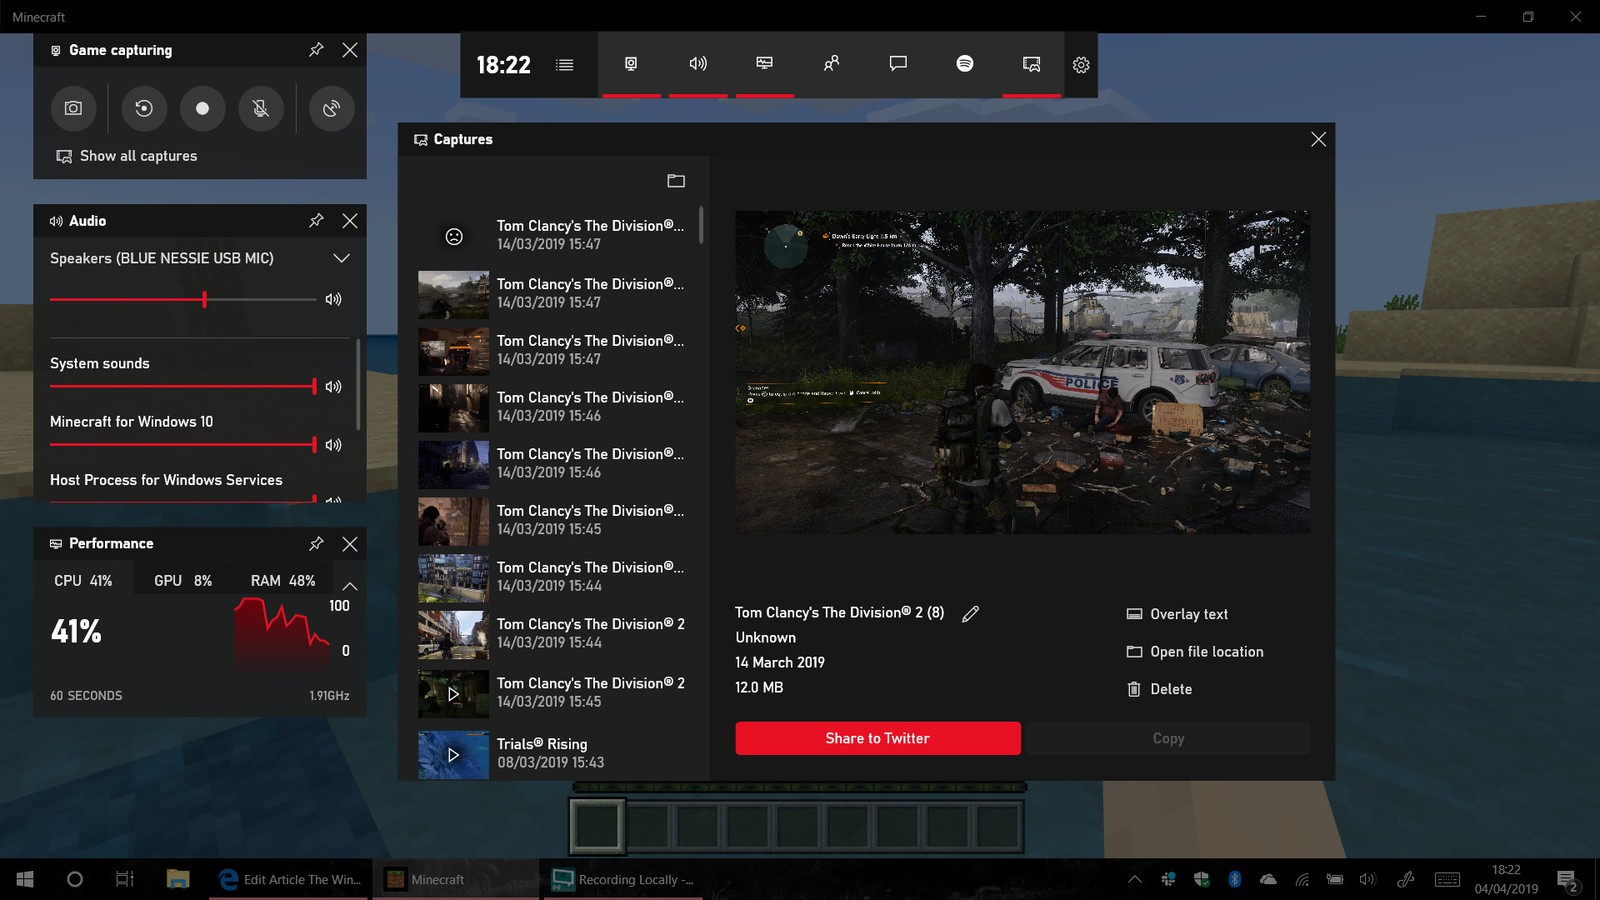 Microsoft Introduces Enhancements To Its Game Bar; Features New Widgets, A New Meme-Maker And Spotify